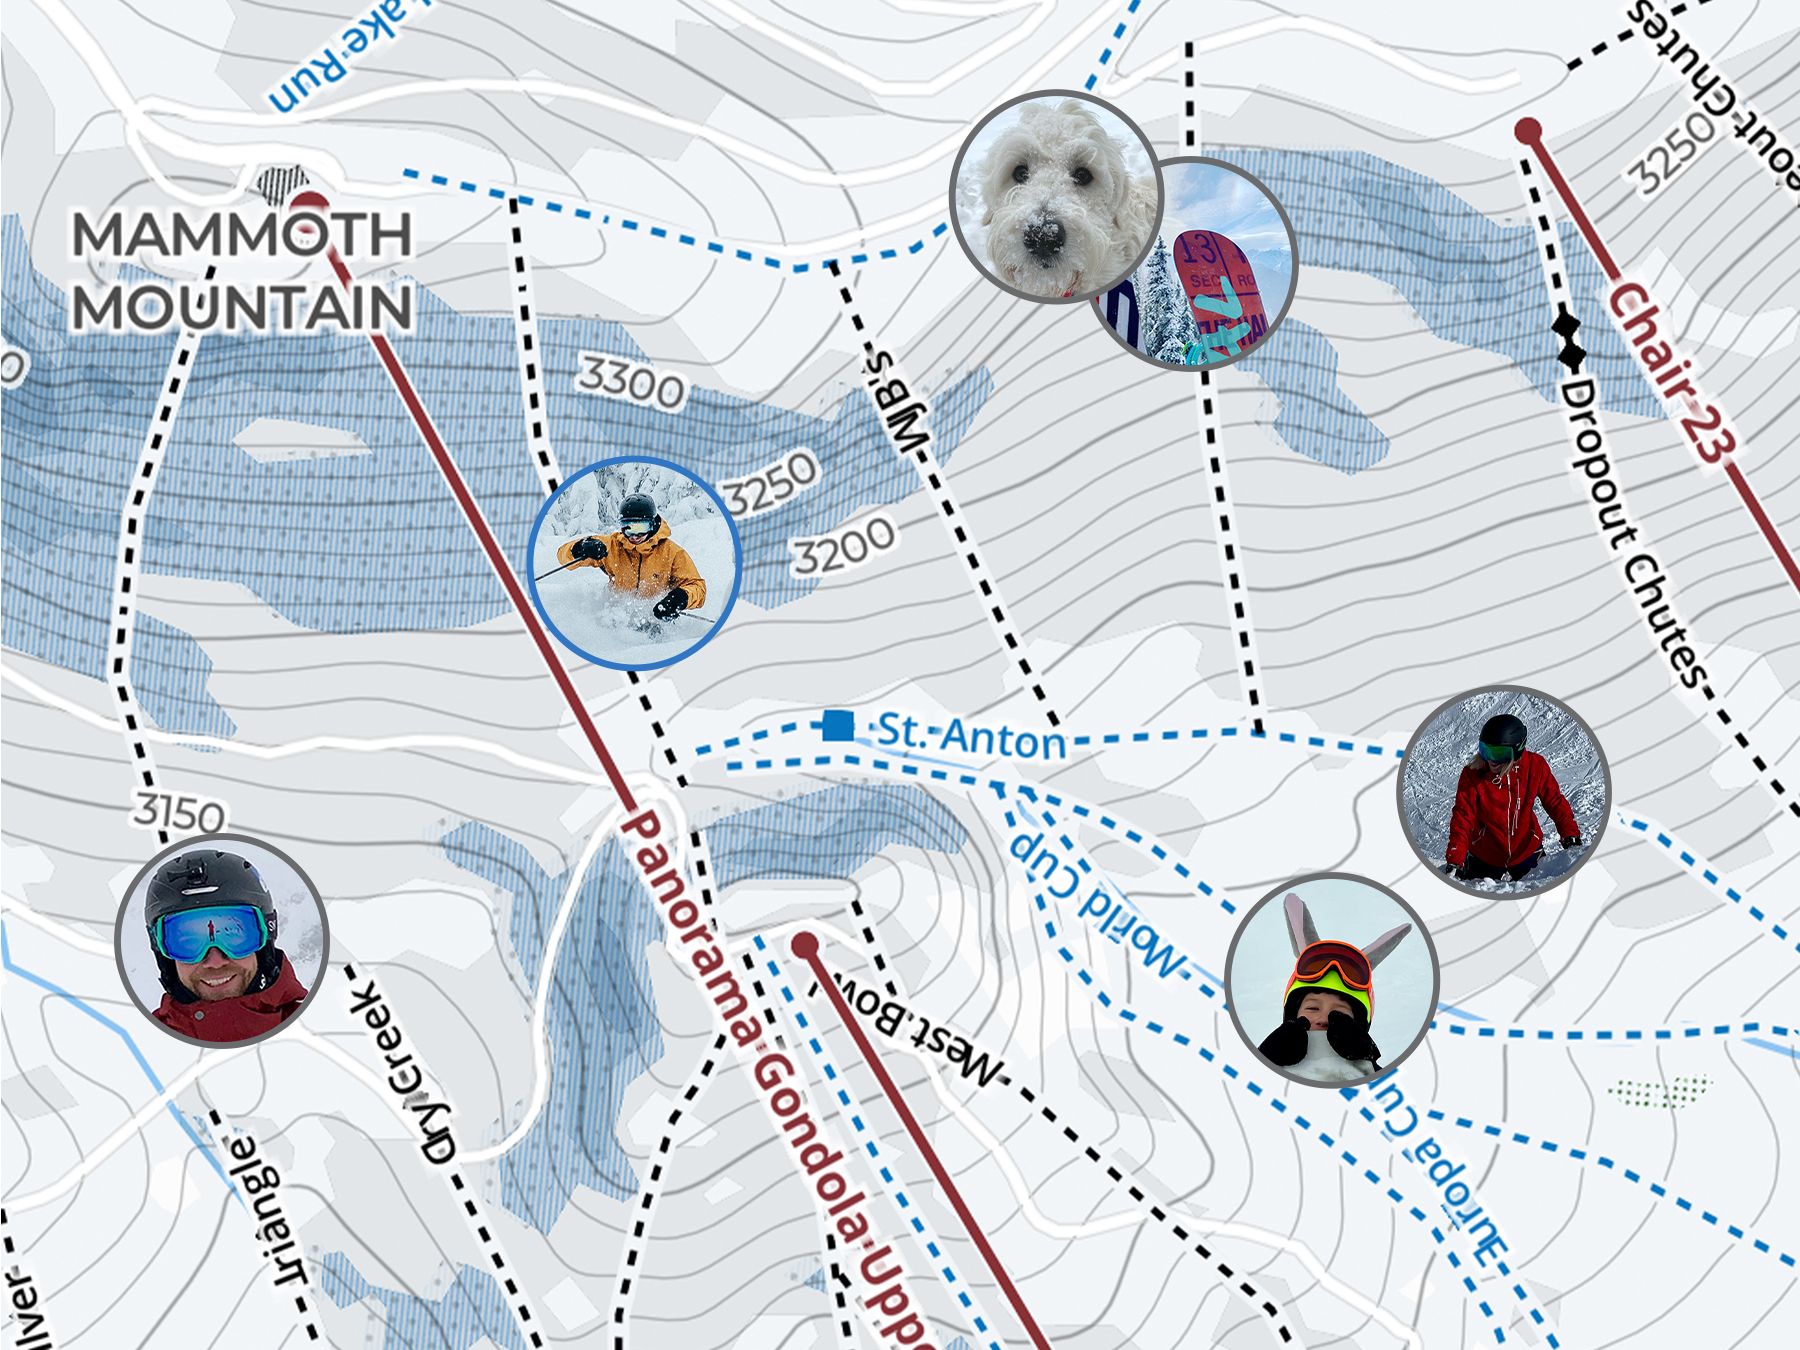 Ride on Interactive Ski Maps at over 400 Resorts Worldwide